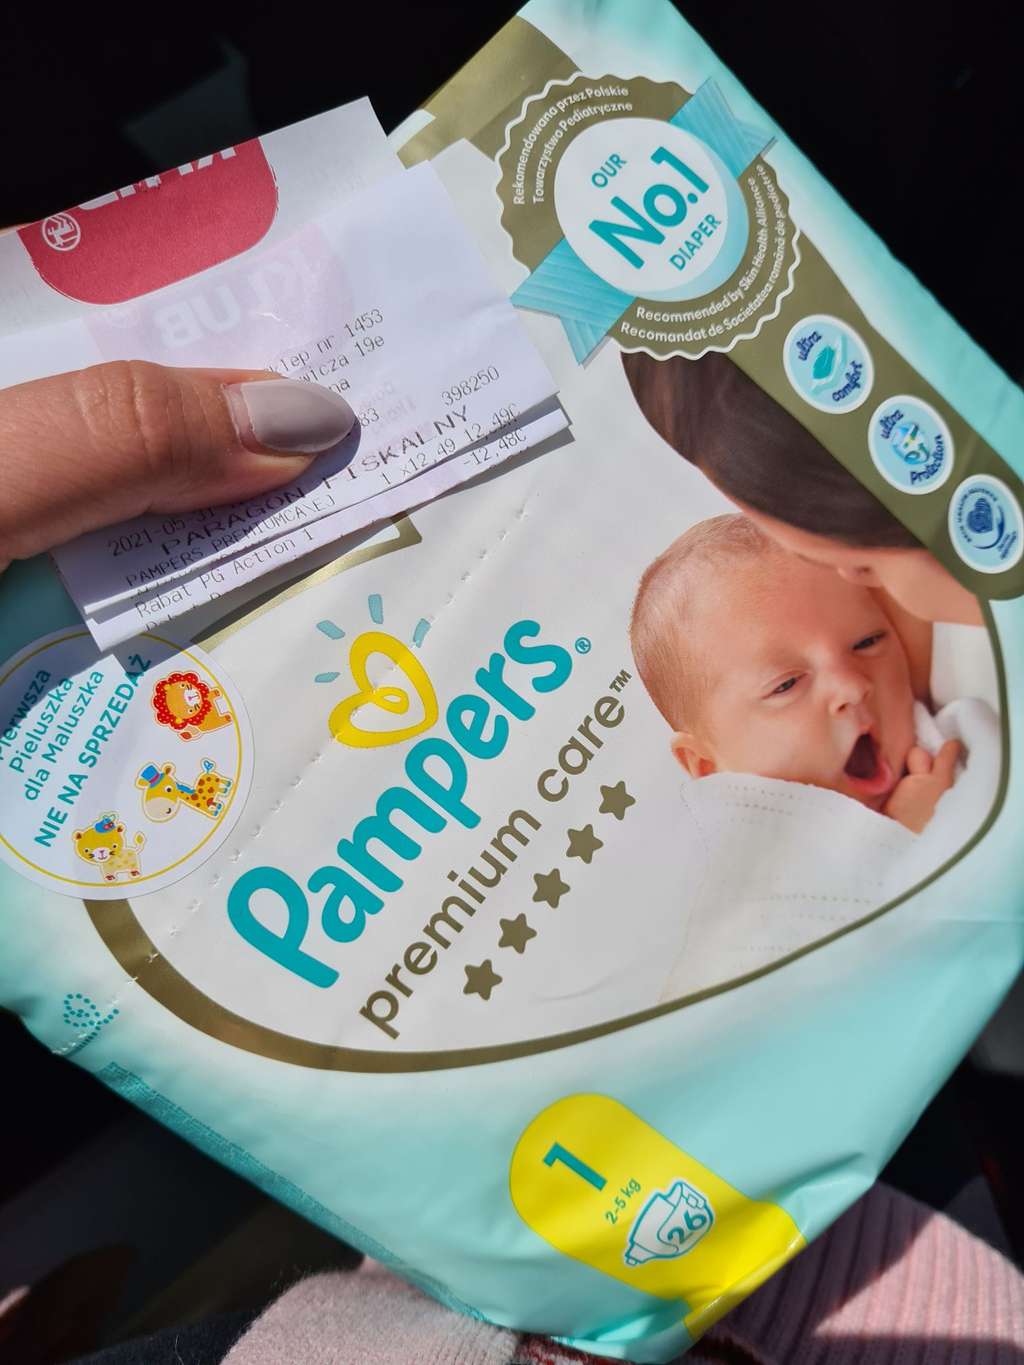 giant pack pampers 6